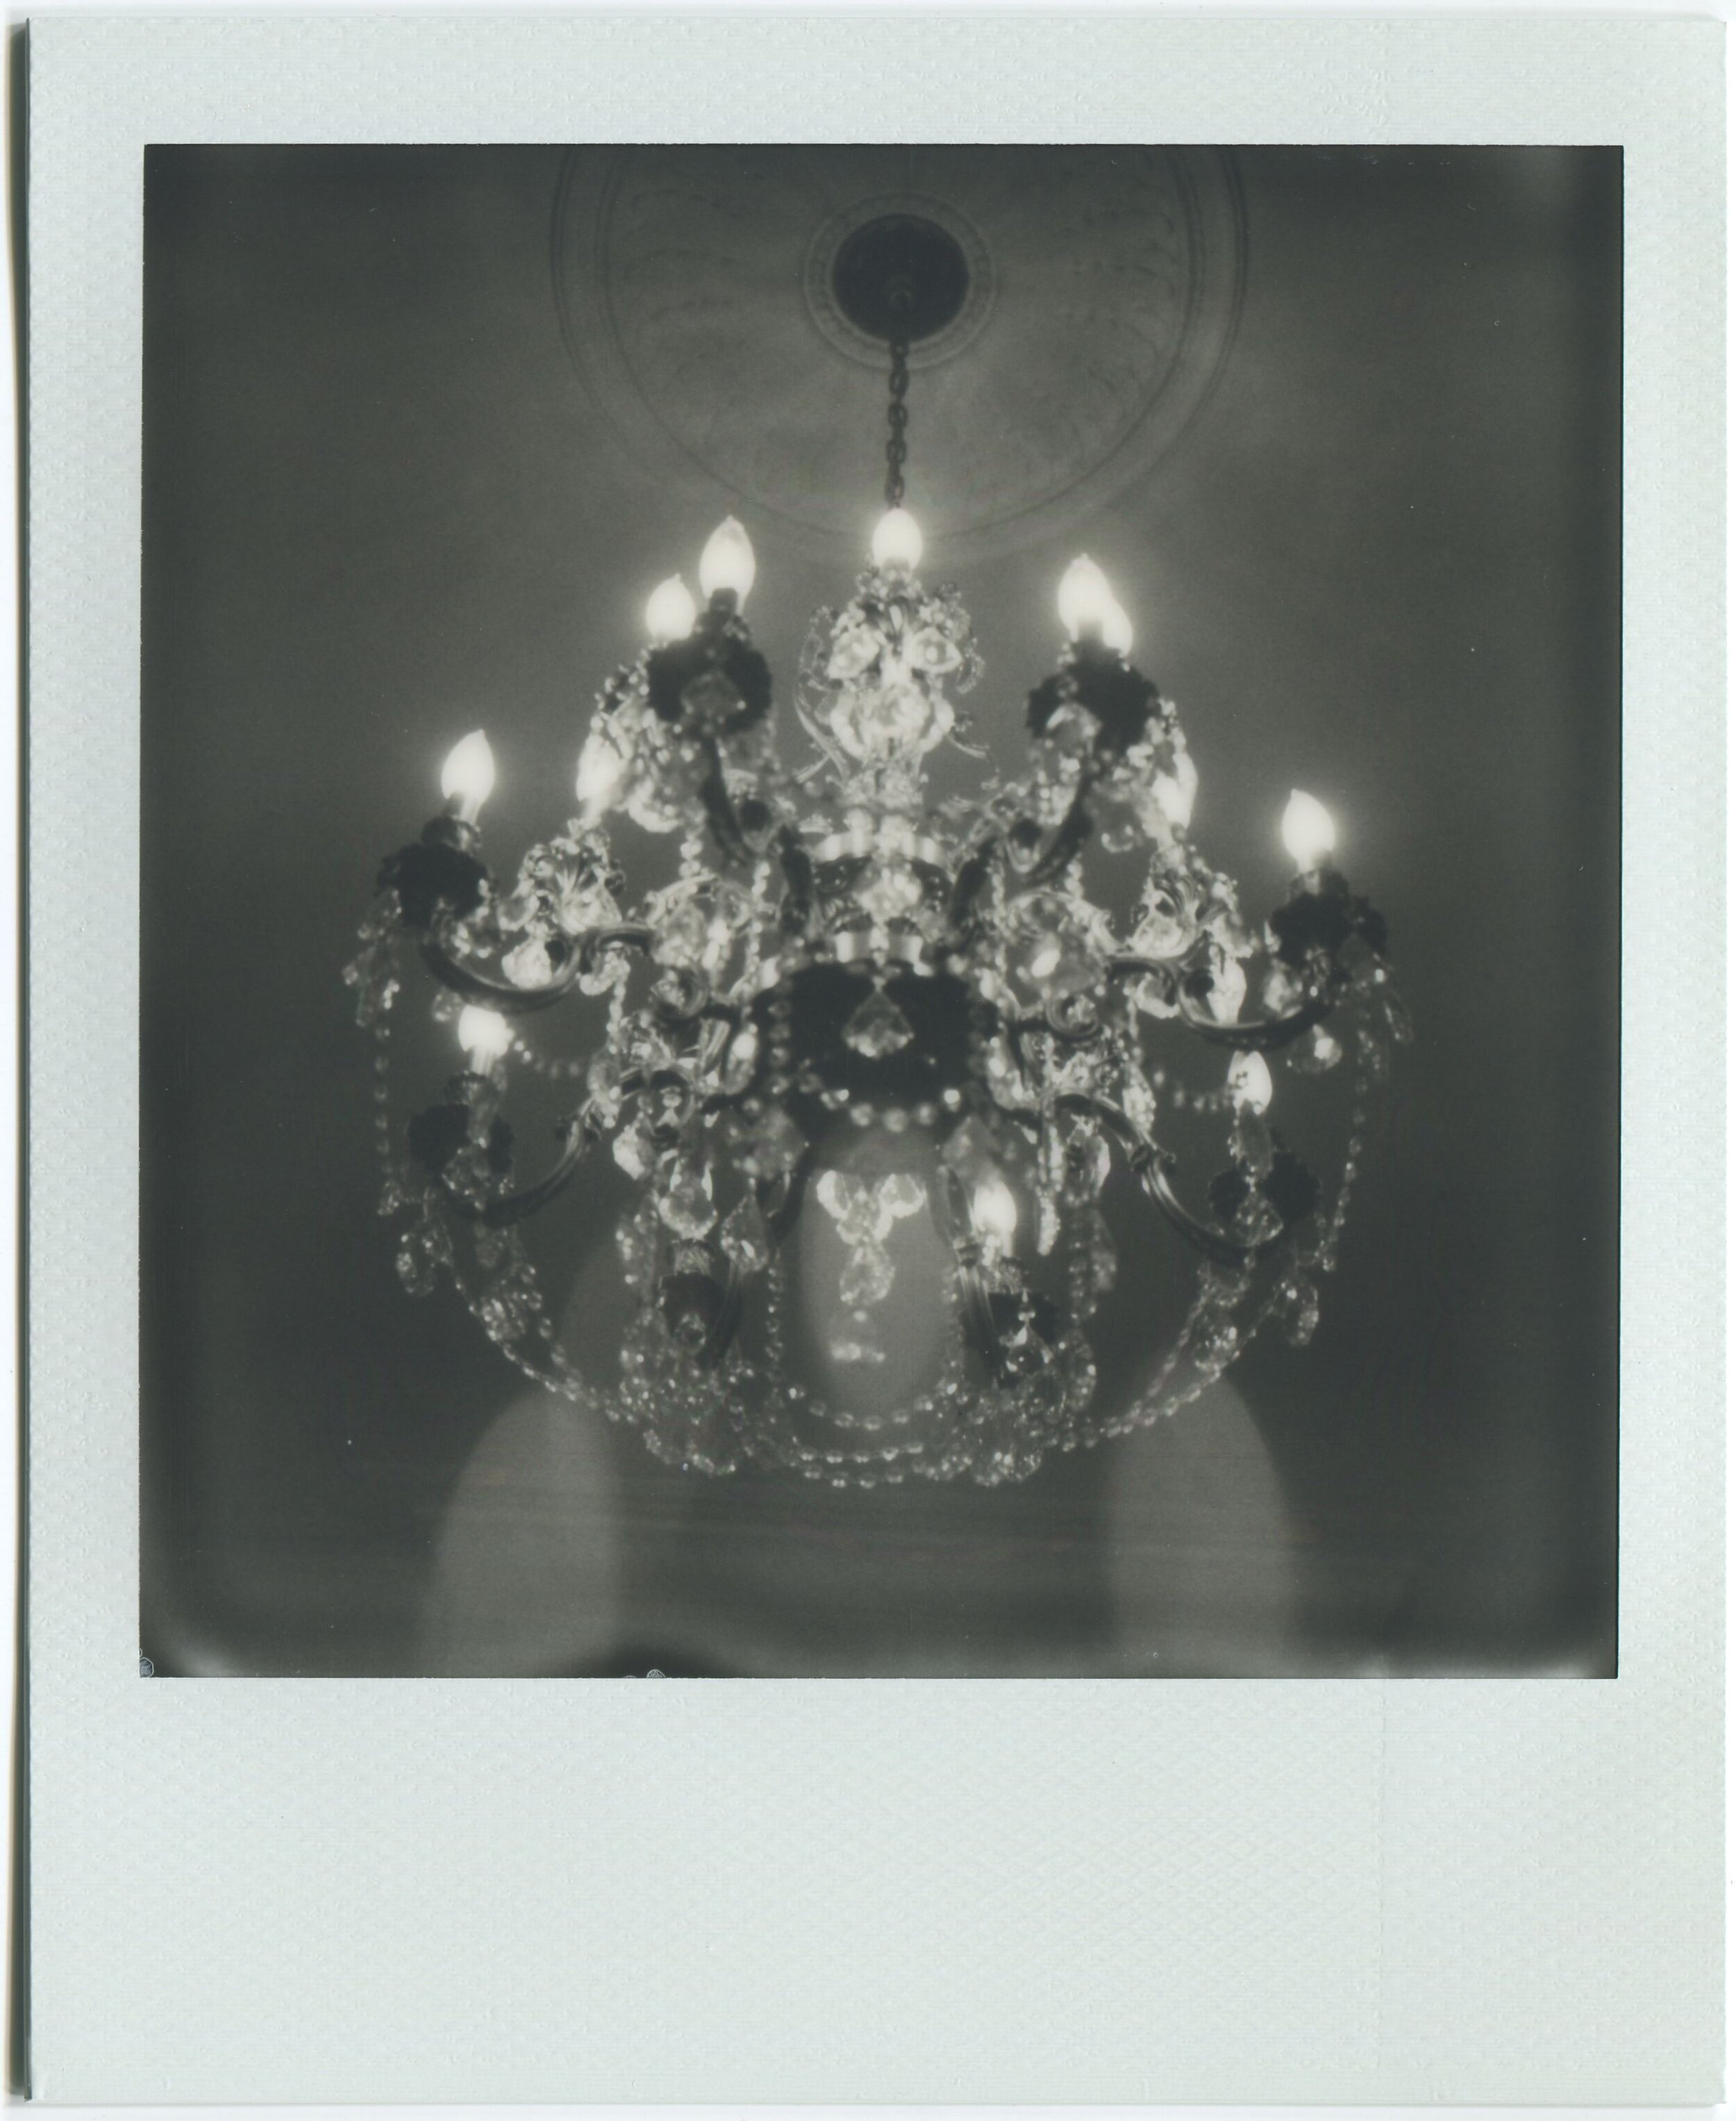 New Orleans / SX-70